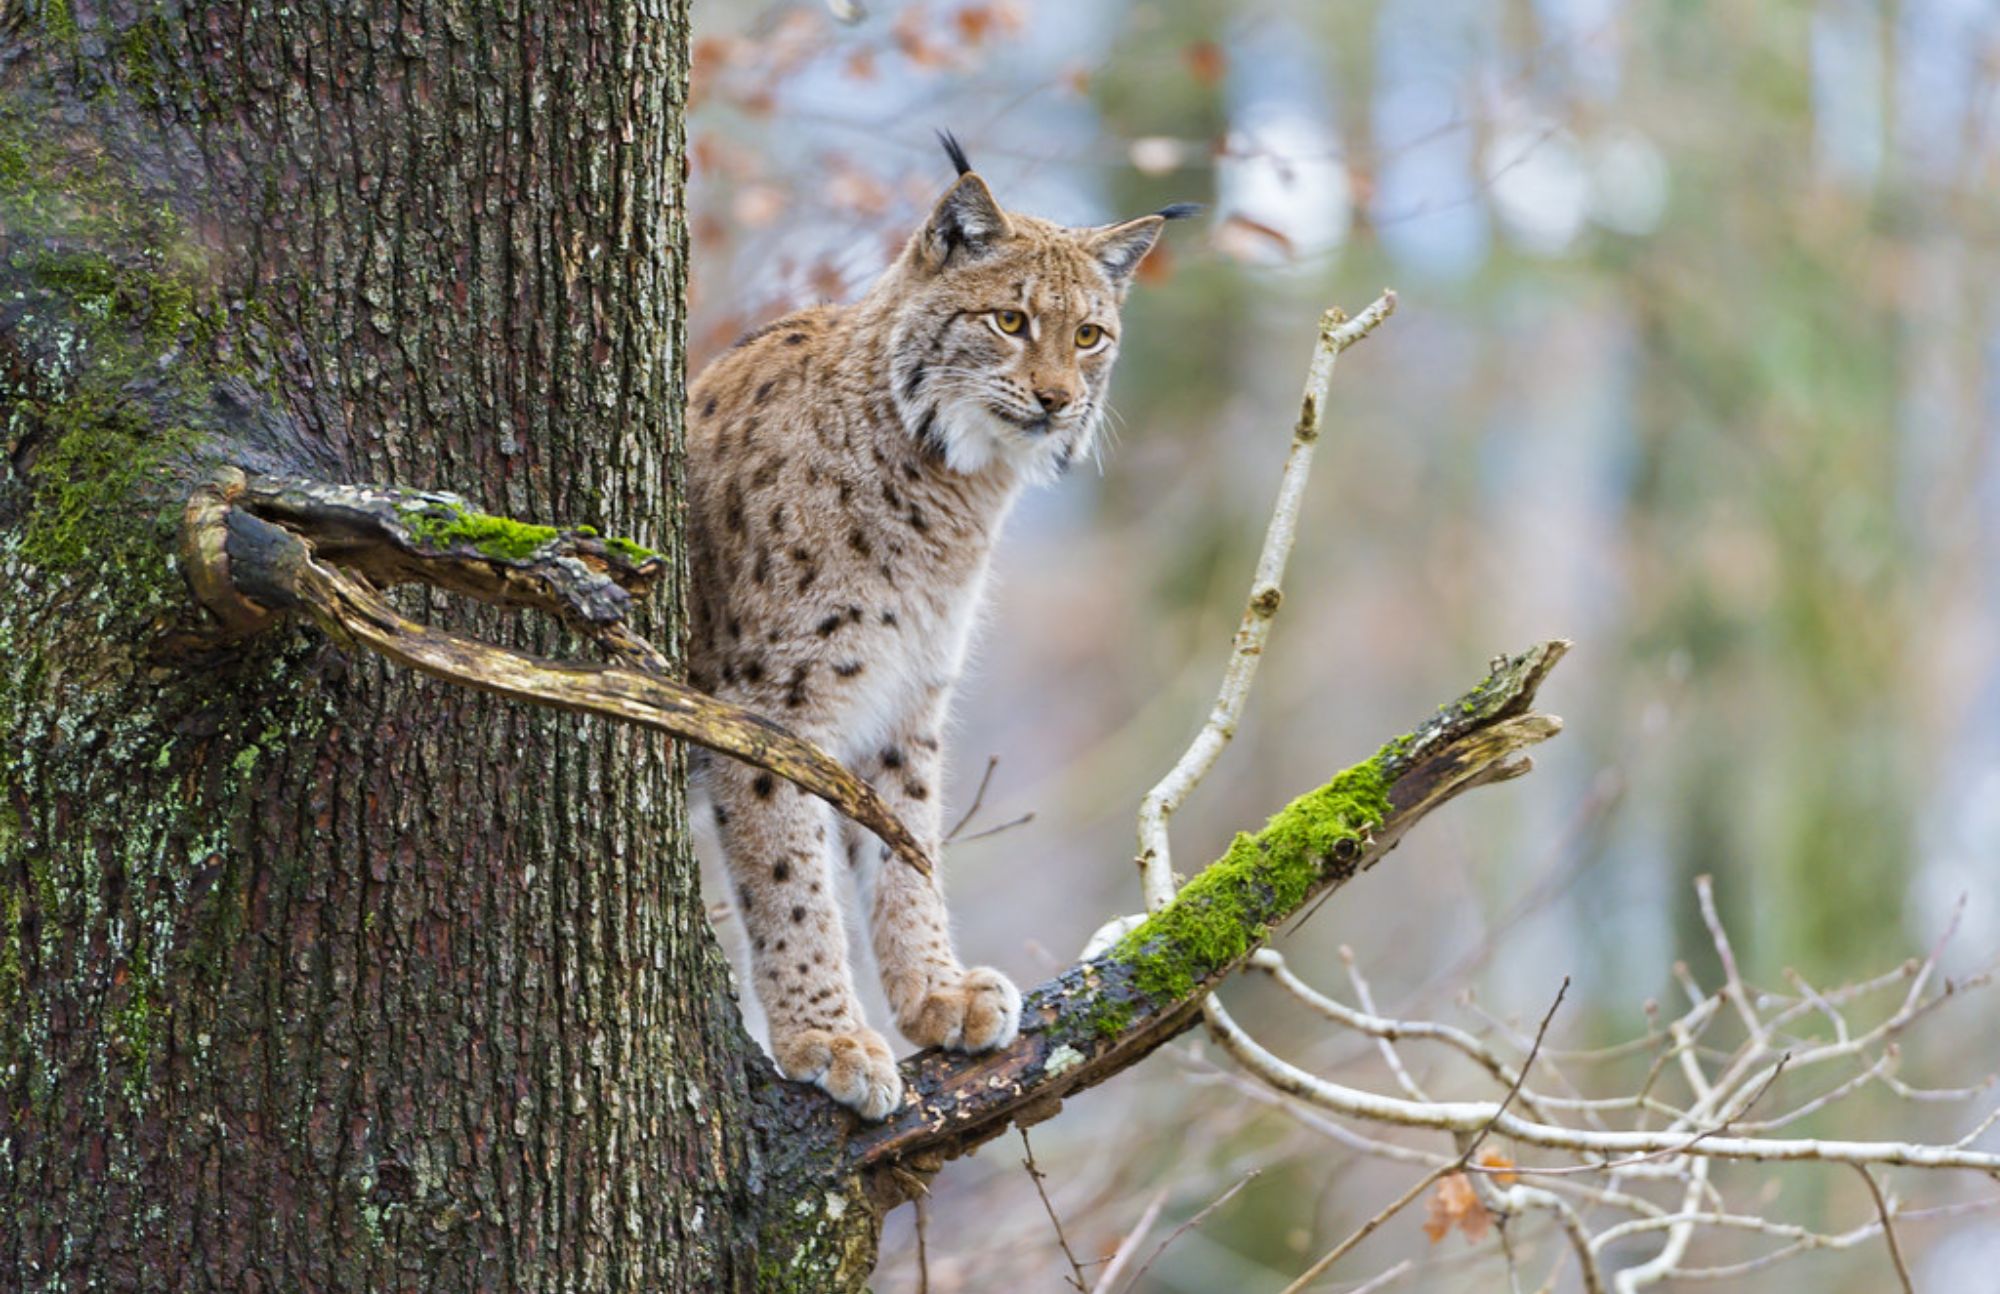 The lynx, which has pointed ears and large paws, is stepping in a branch of a tree